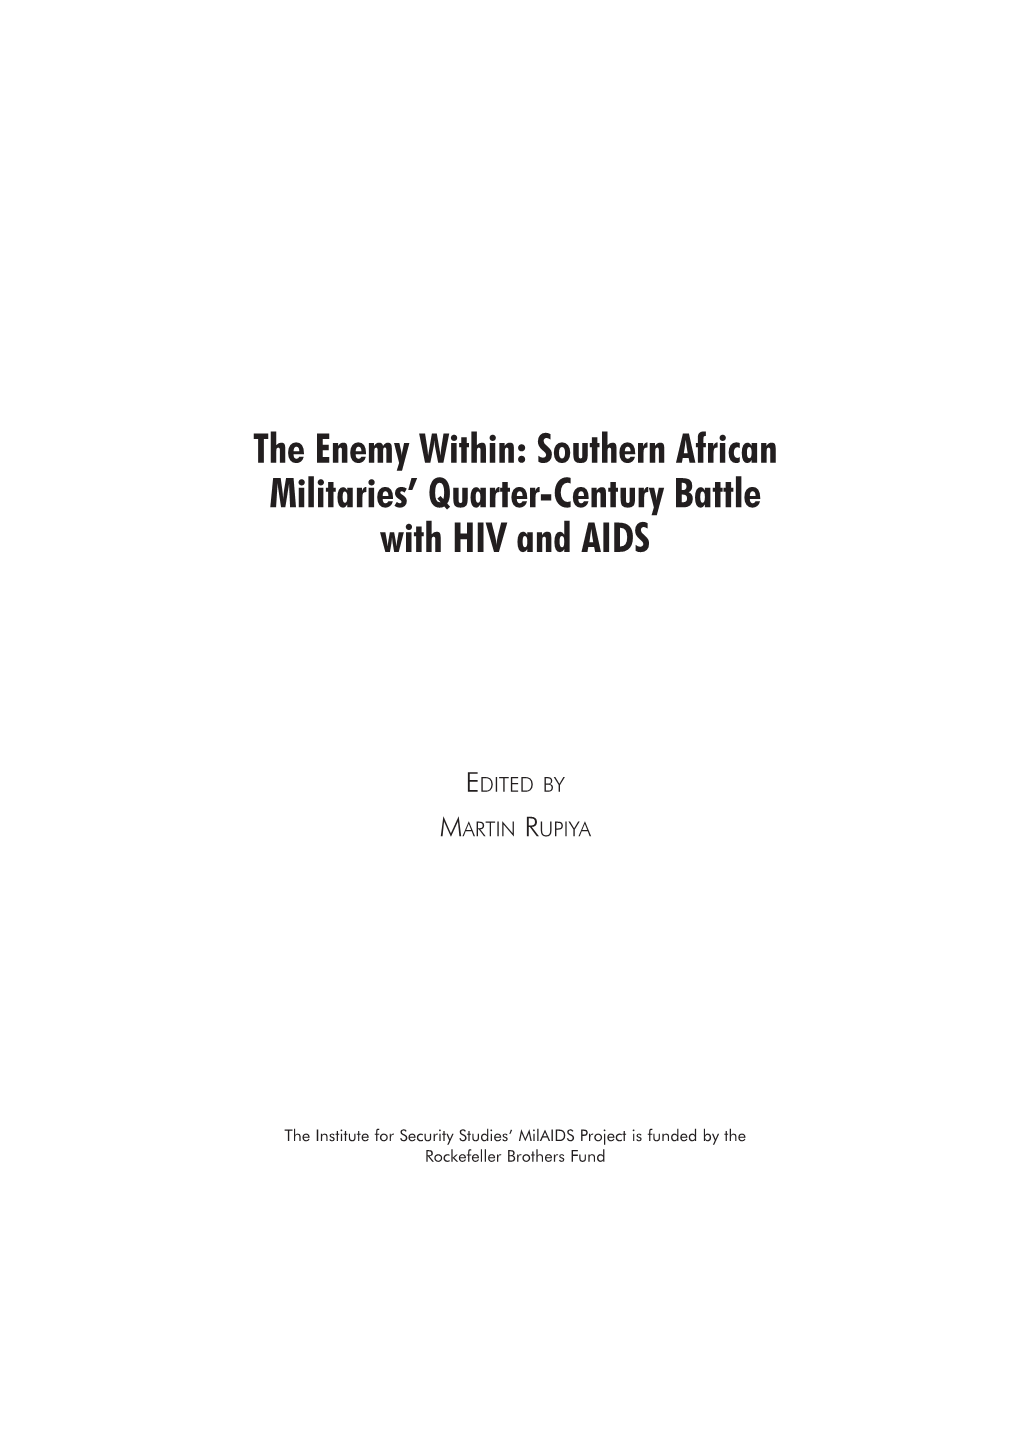 The Enemy Within: Southern African Militaries’ Quarter-Century Battle with HIV and AIDS